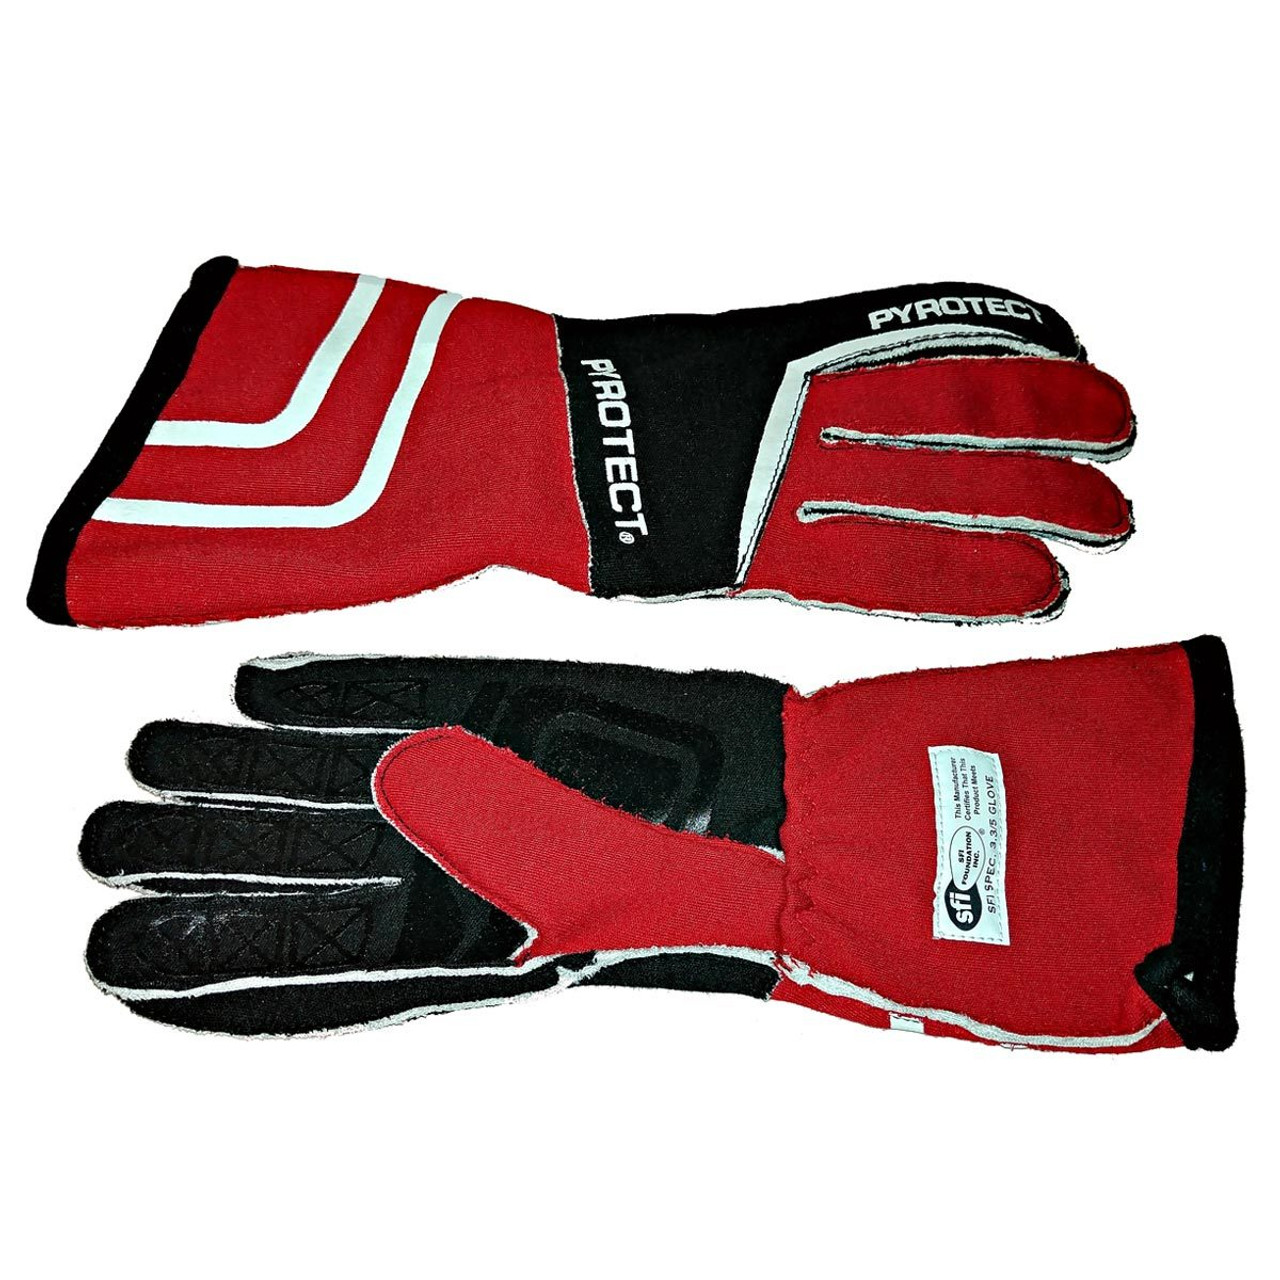 Pyrotect Glove Sport 2 Layer Blk/ Red Large SFI-5